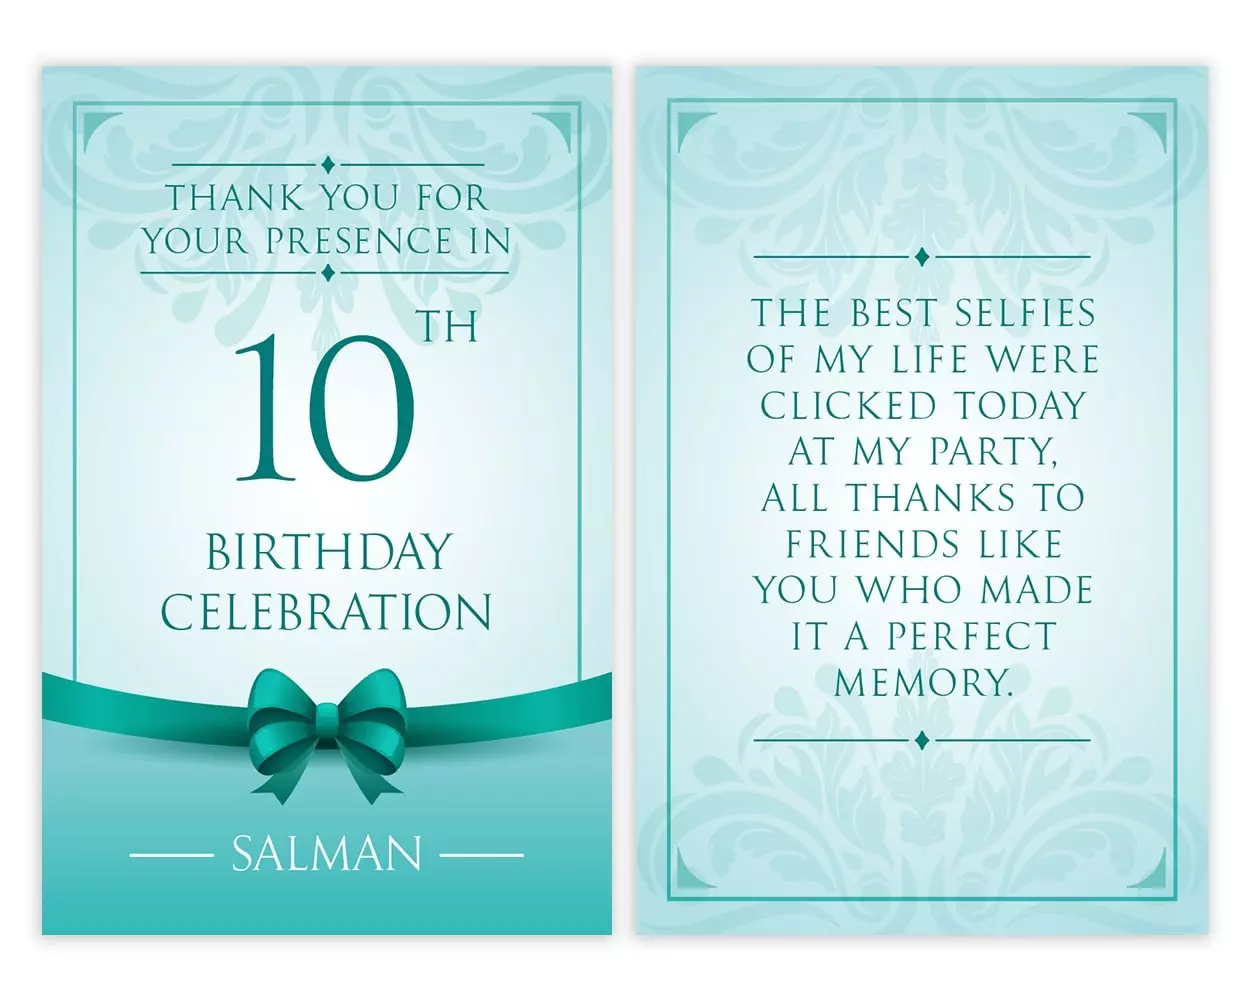 All Sides of Design Number 7 for Message Cards for Birthday Return Gifts